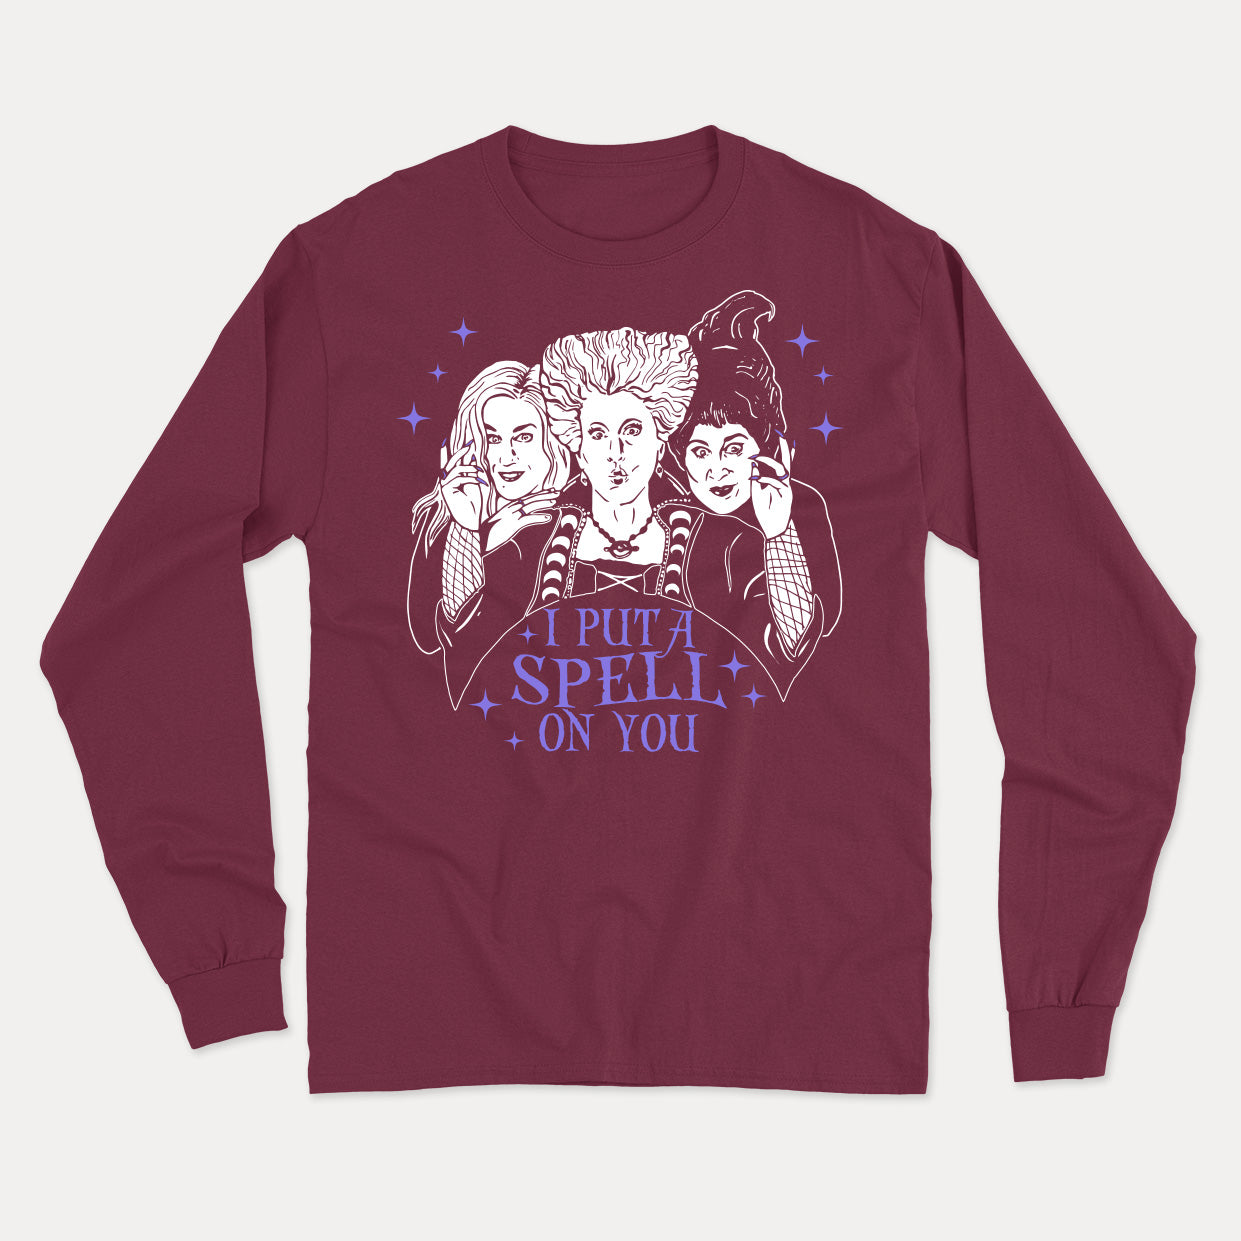 I PUT A SPELL ON YOU longsleeve vintage unisexe - tamelo boutique